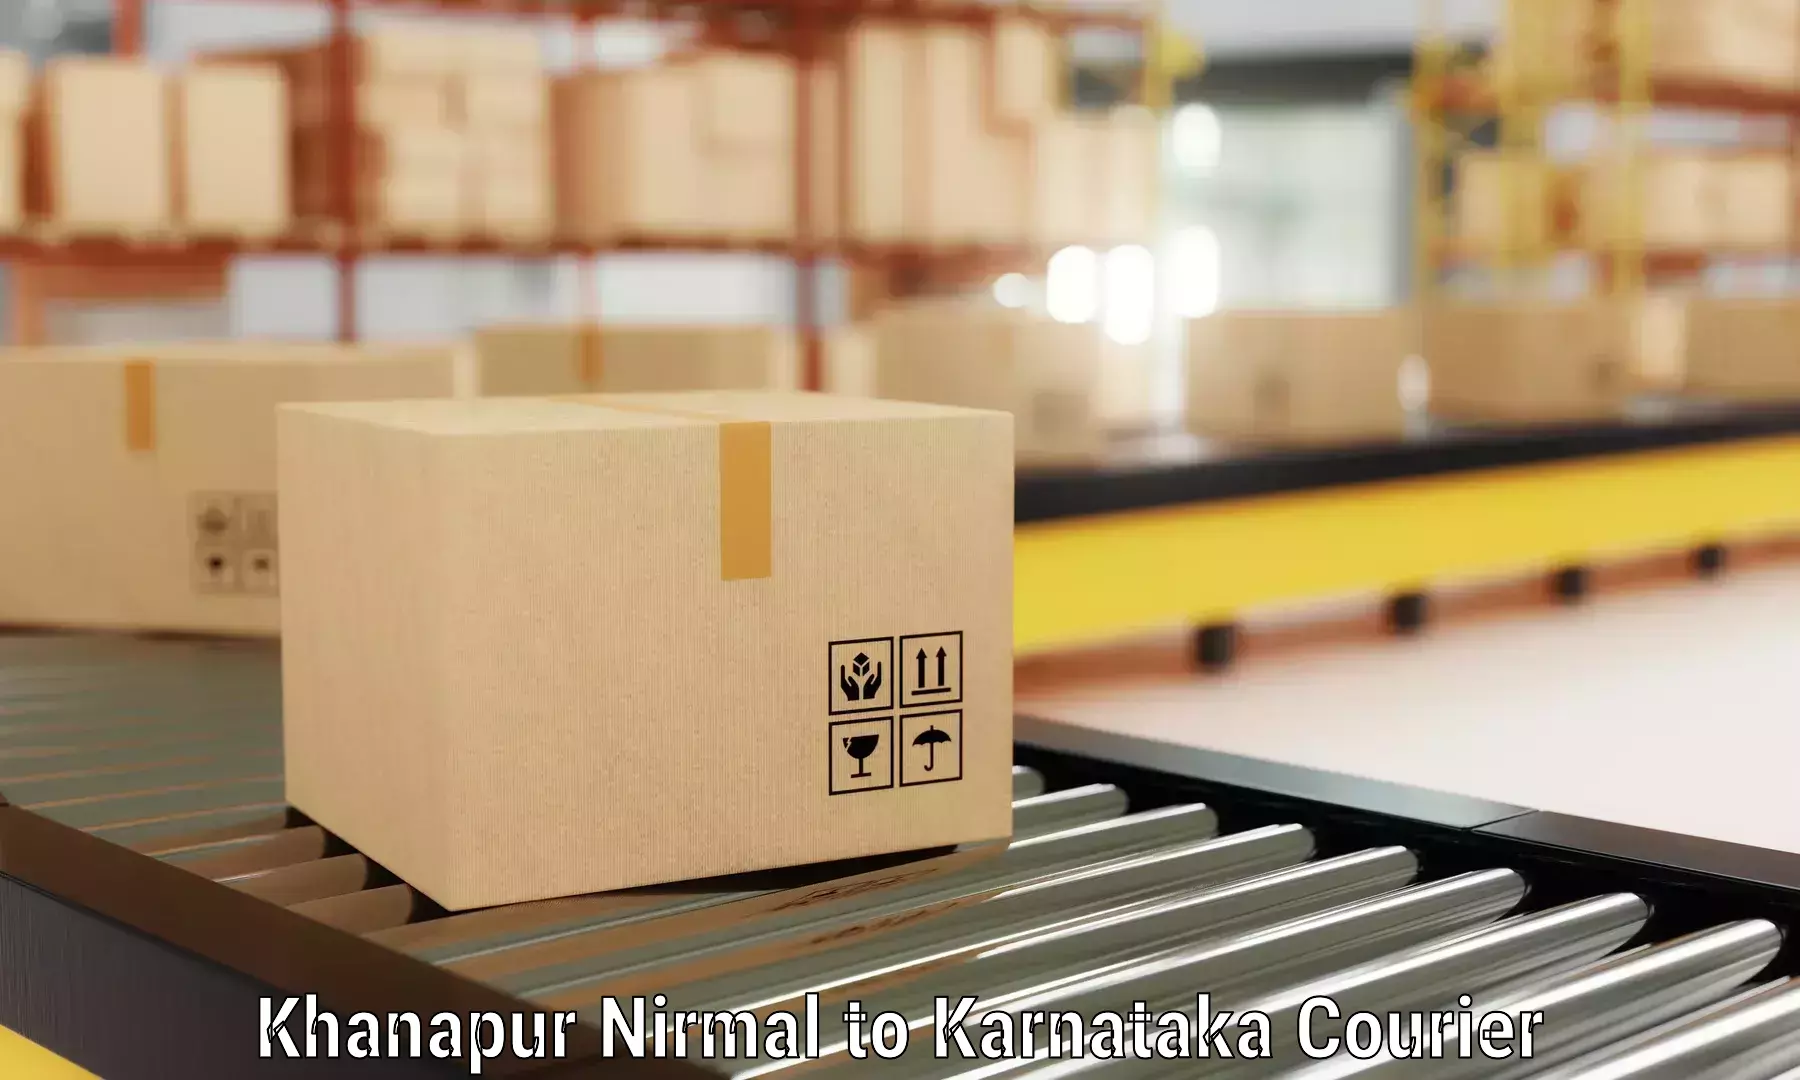 Household goods movers and packers Khanapur Nirmal to Gurmatkal